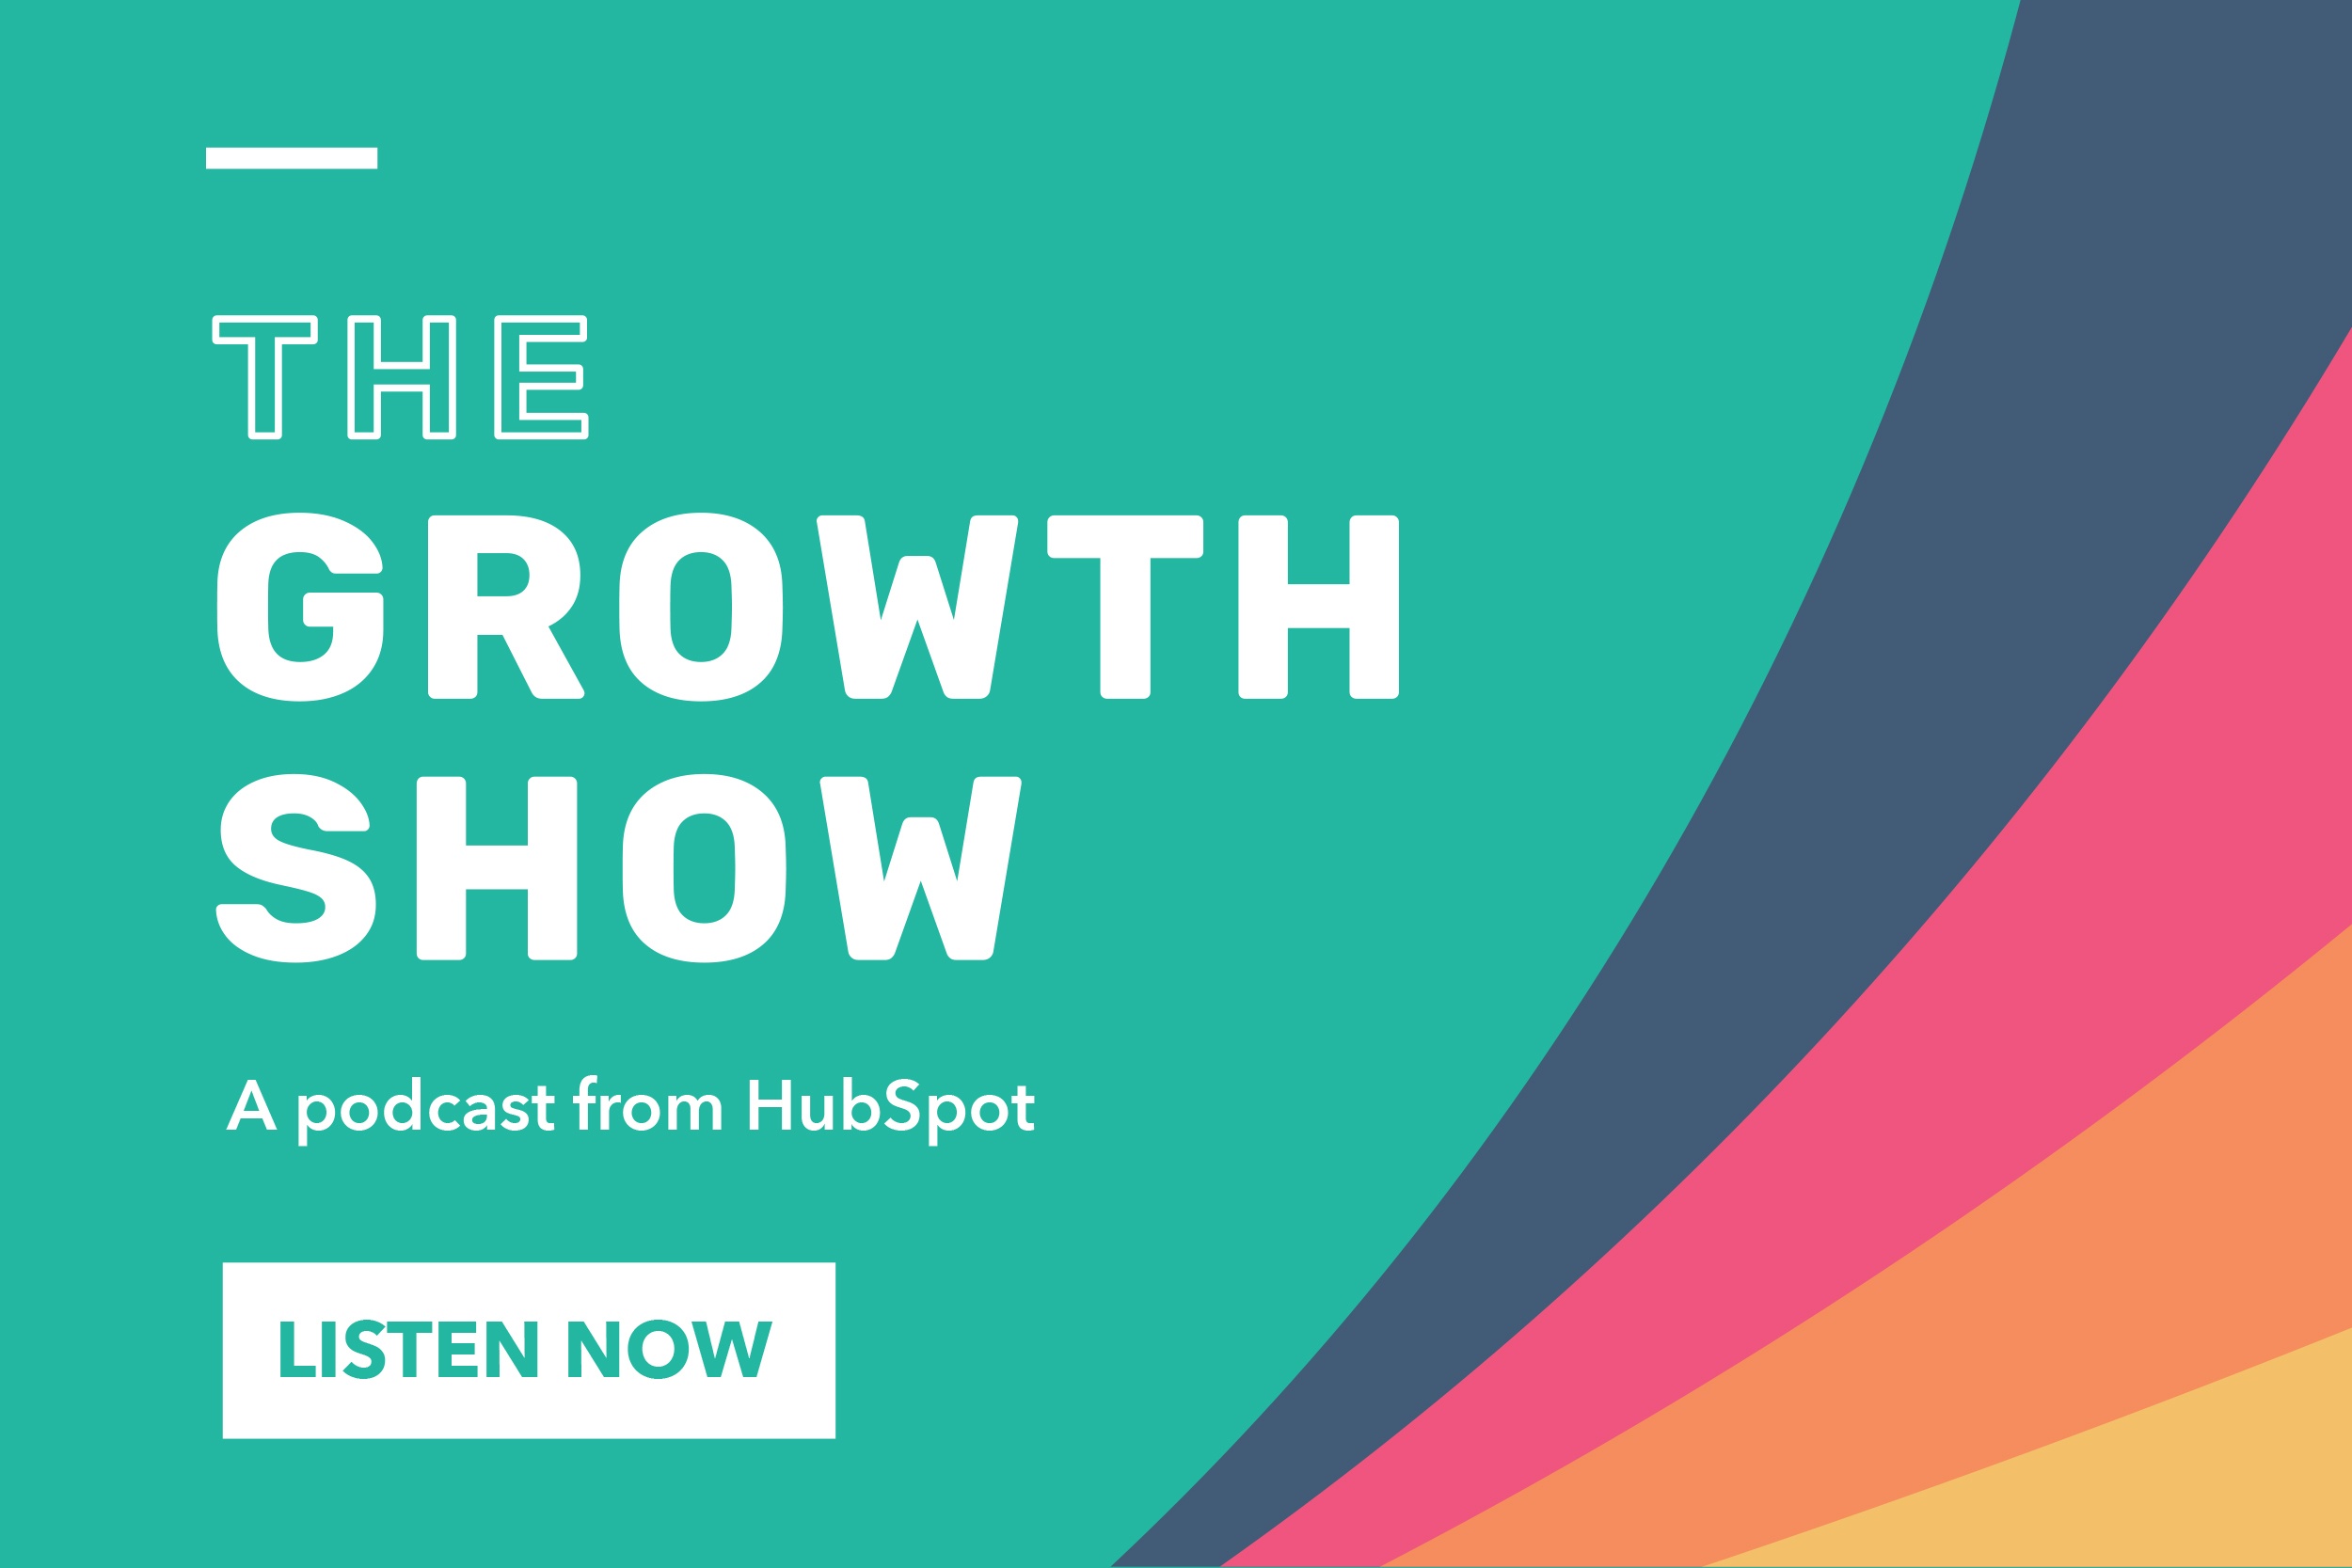 HubSpot Launches Season Three of the Growth Show, Featuring Interviews with ClassPass, Glossier, Spartan, and More